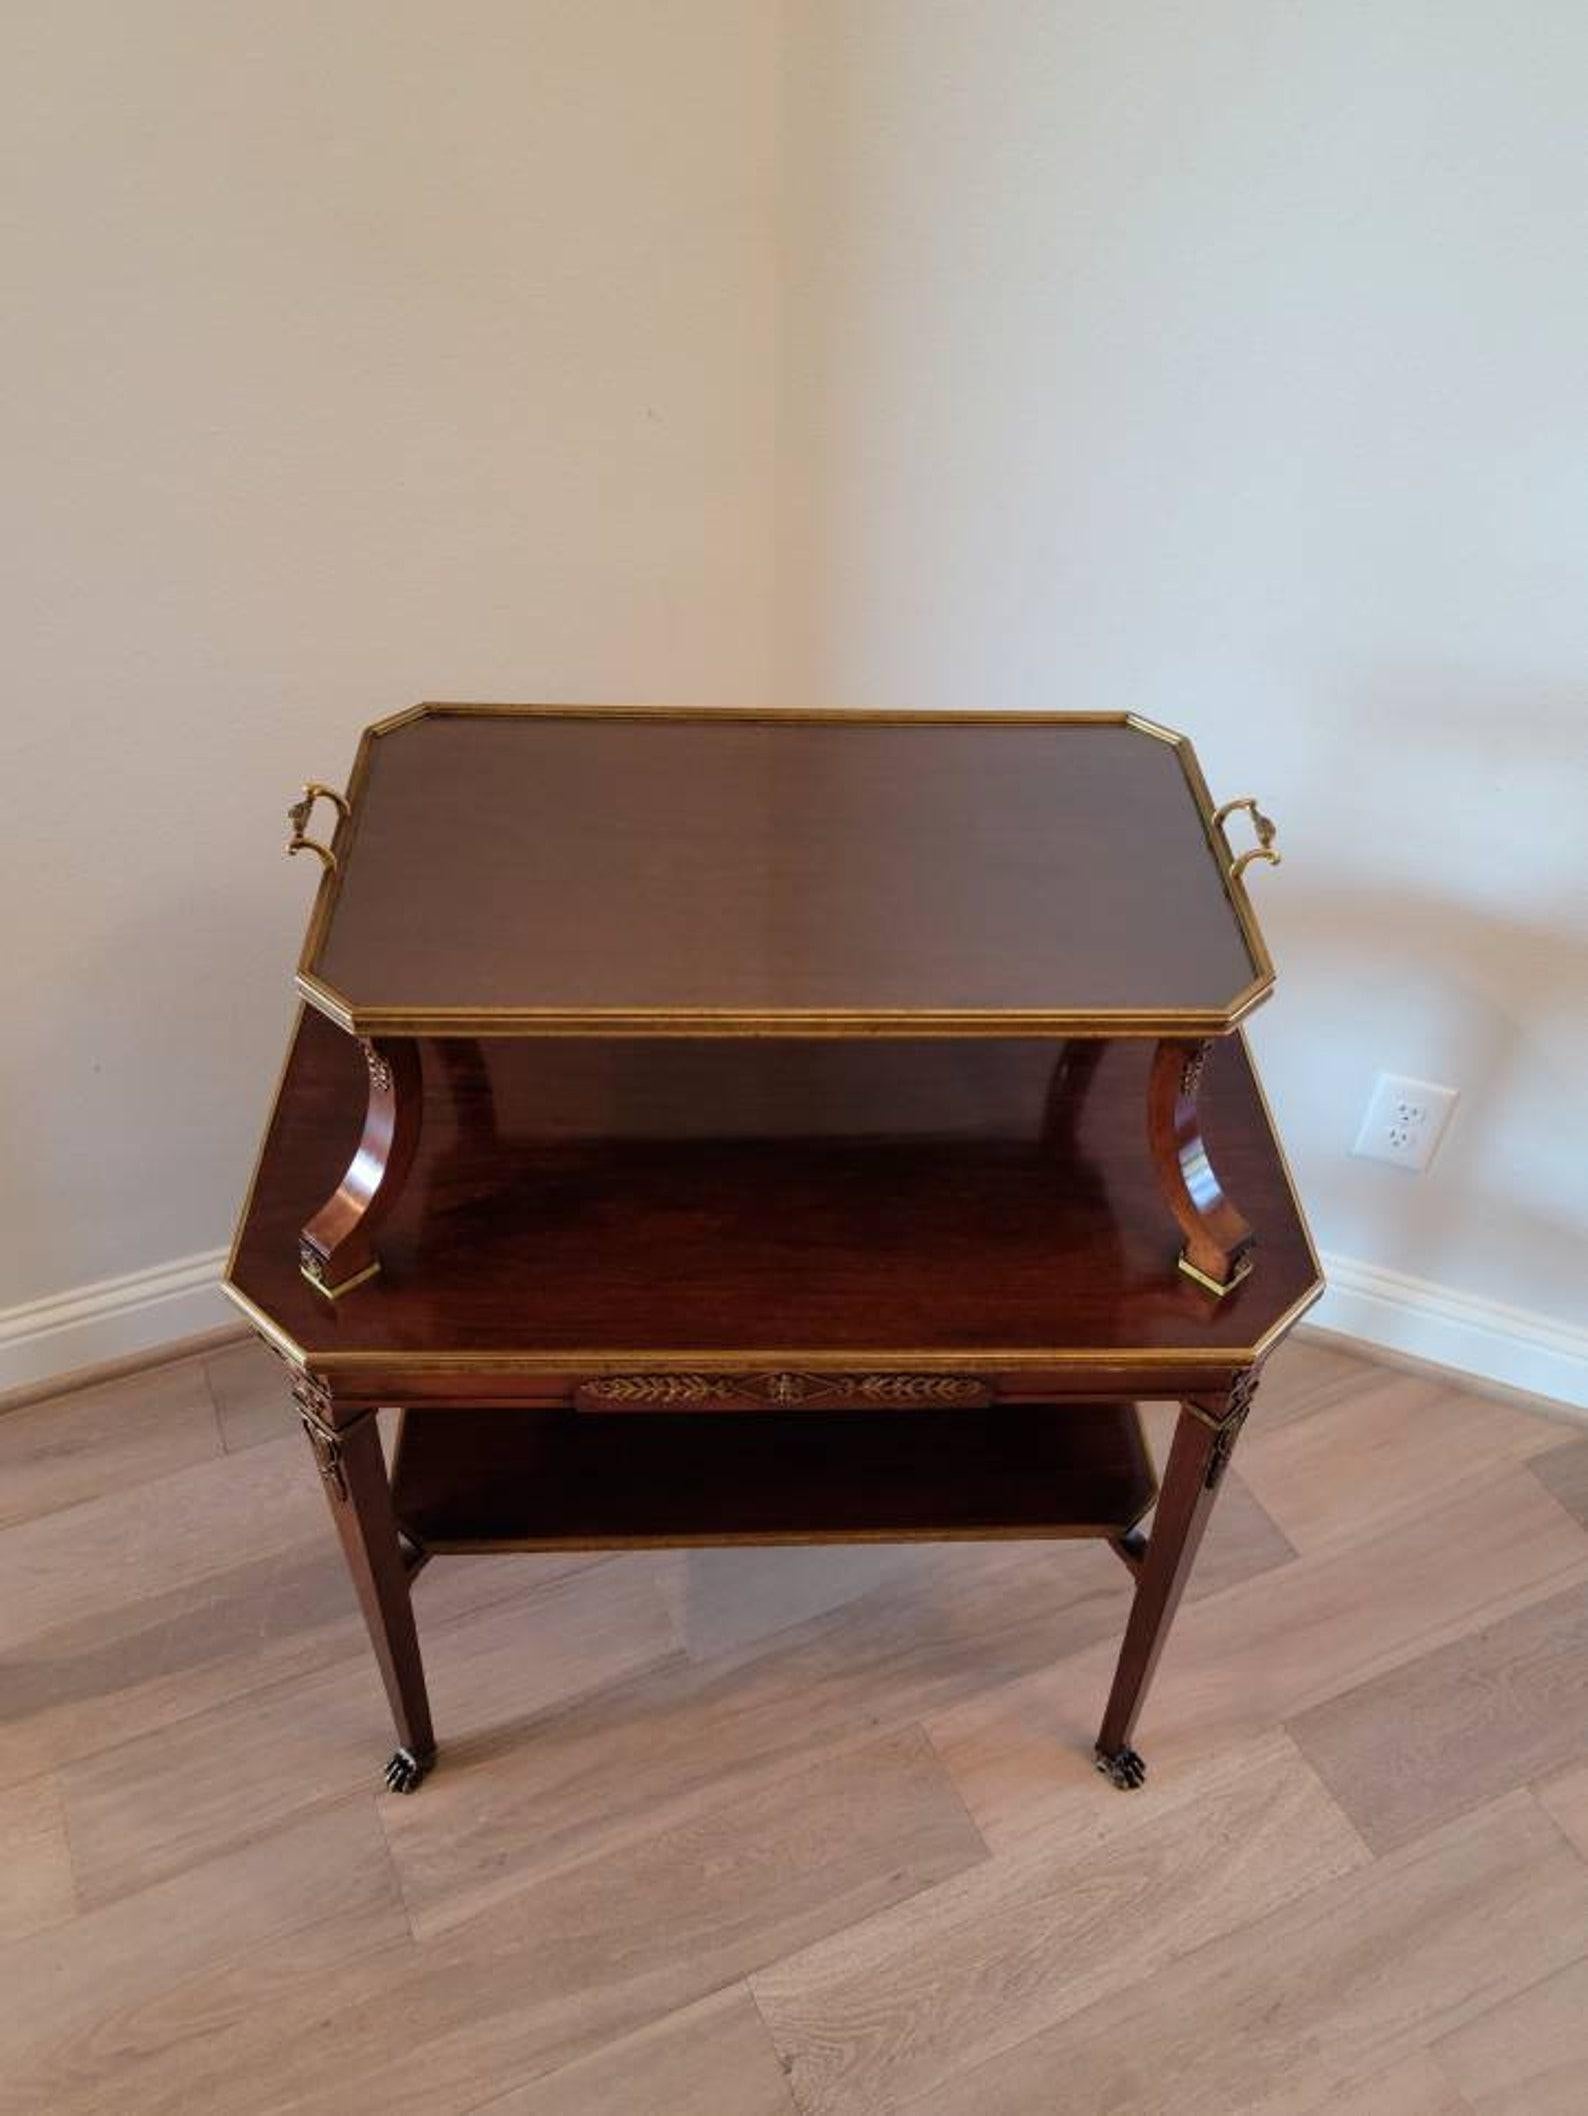 20th Century Krieger Signed Antique French Empire Tiered Tea Tray Table For Sale